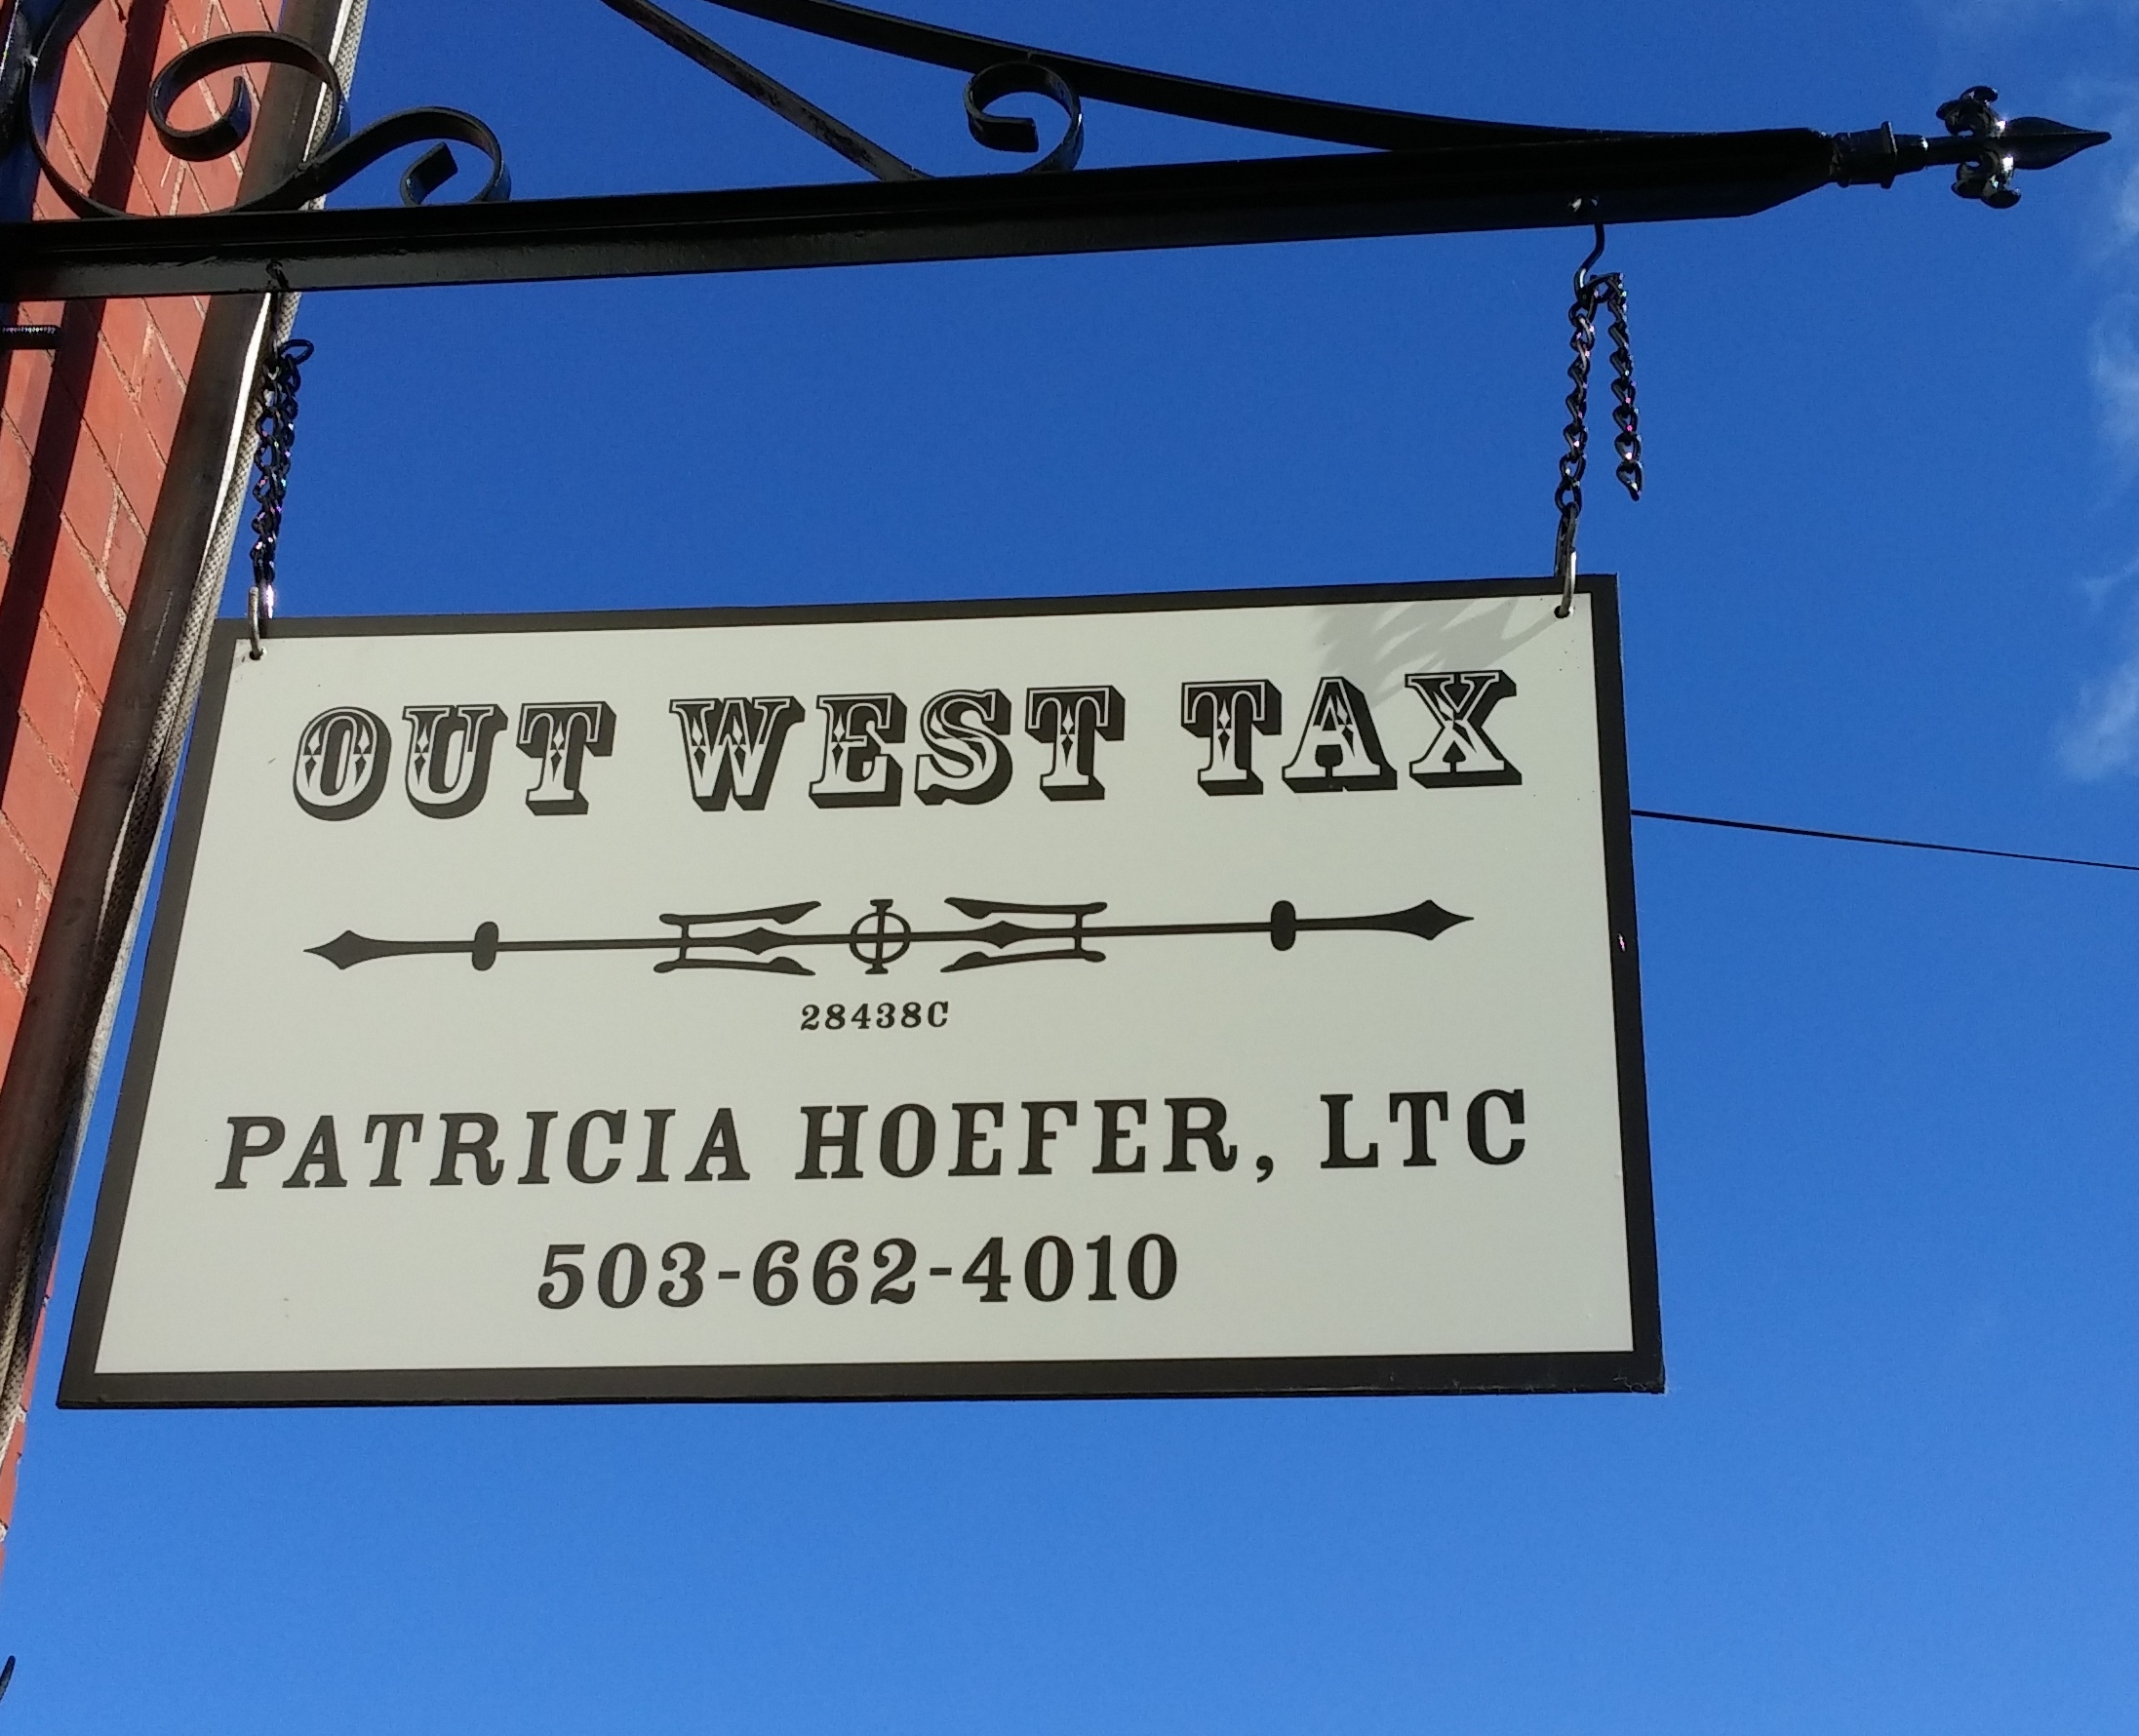 Tax Preparers and Tax Attorneys Out West Tax Service in Yamhill OR